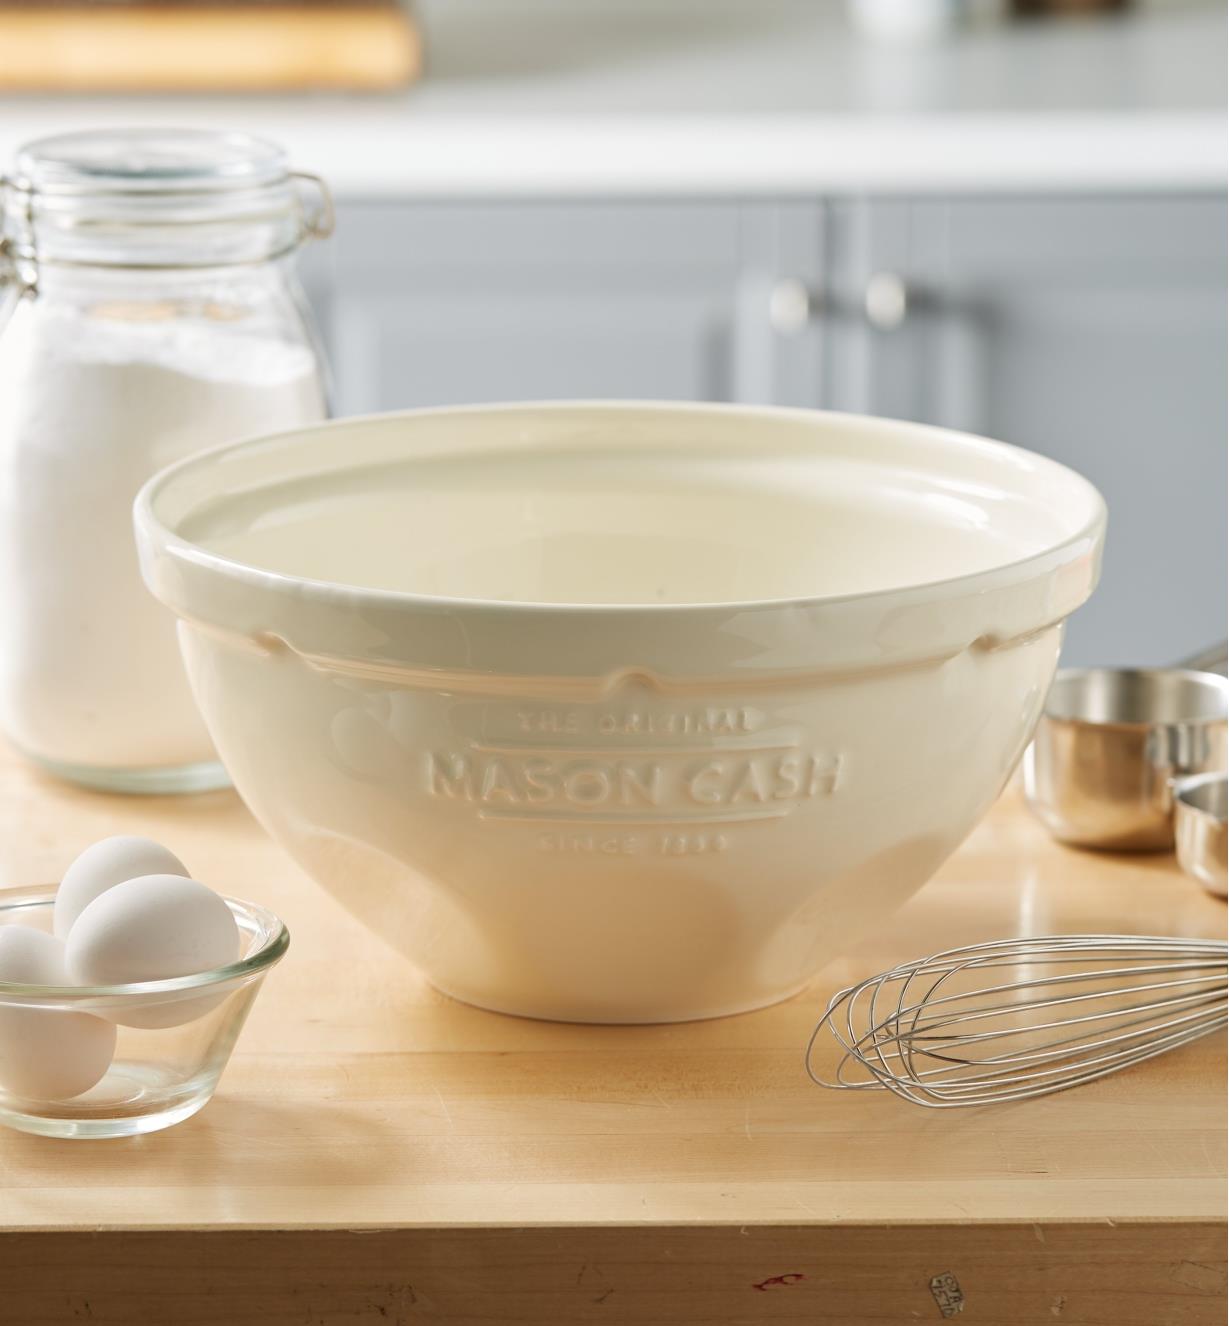 A Mason Cash mixing bowl sits on a kitchen countertop near utensils and ingredients